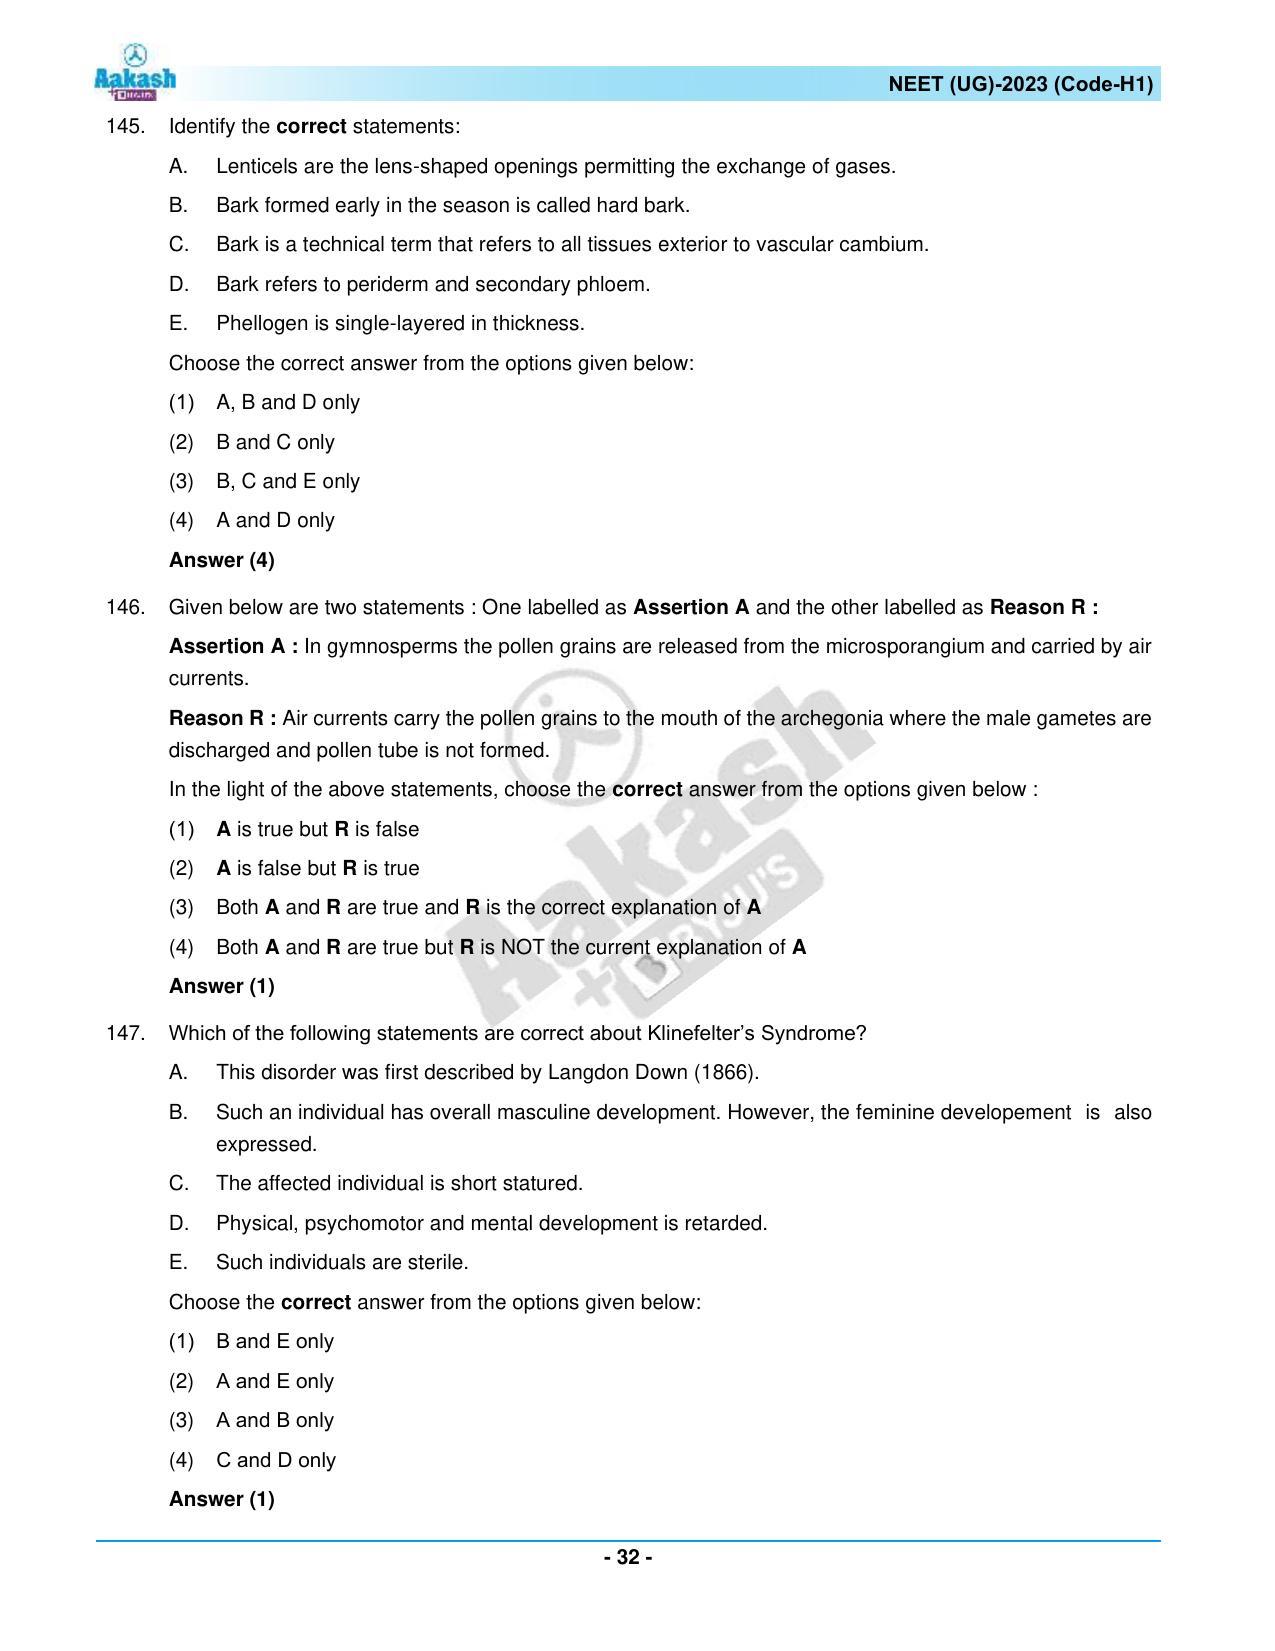 NEET 2023 Question Paper H1 - Page 32